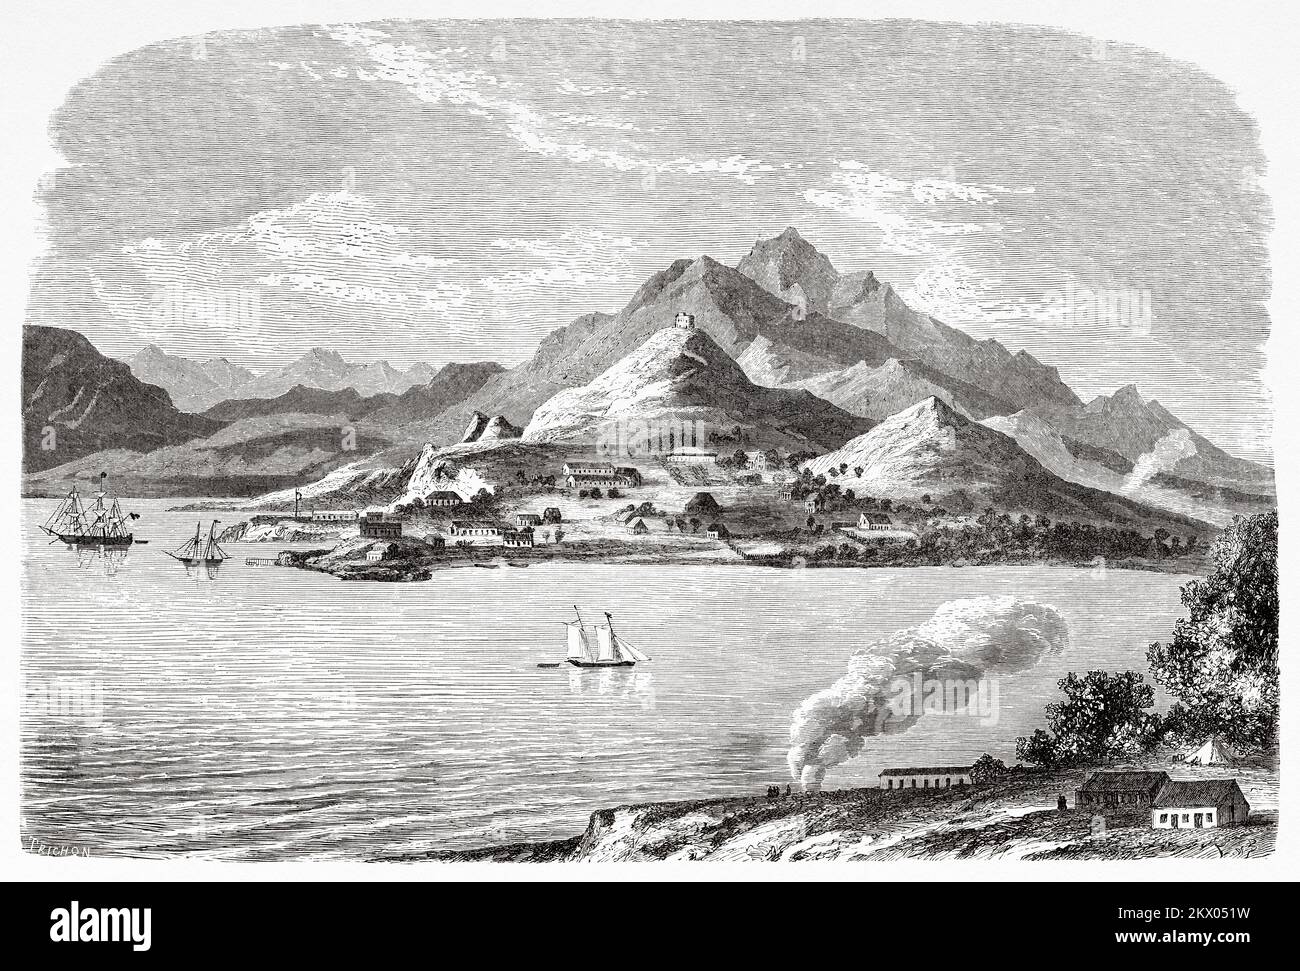 View of Port-de-France, New Caledonia, Oceania. Souvenir of a French squatter in Australia by H. de Castella 1854-1856 Stock Photo